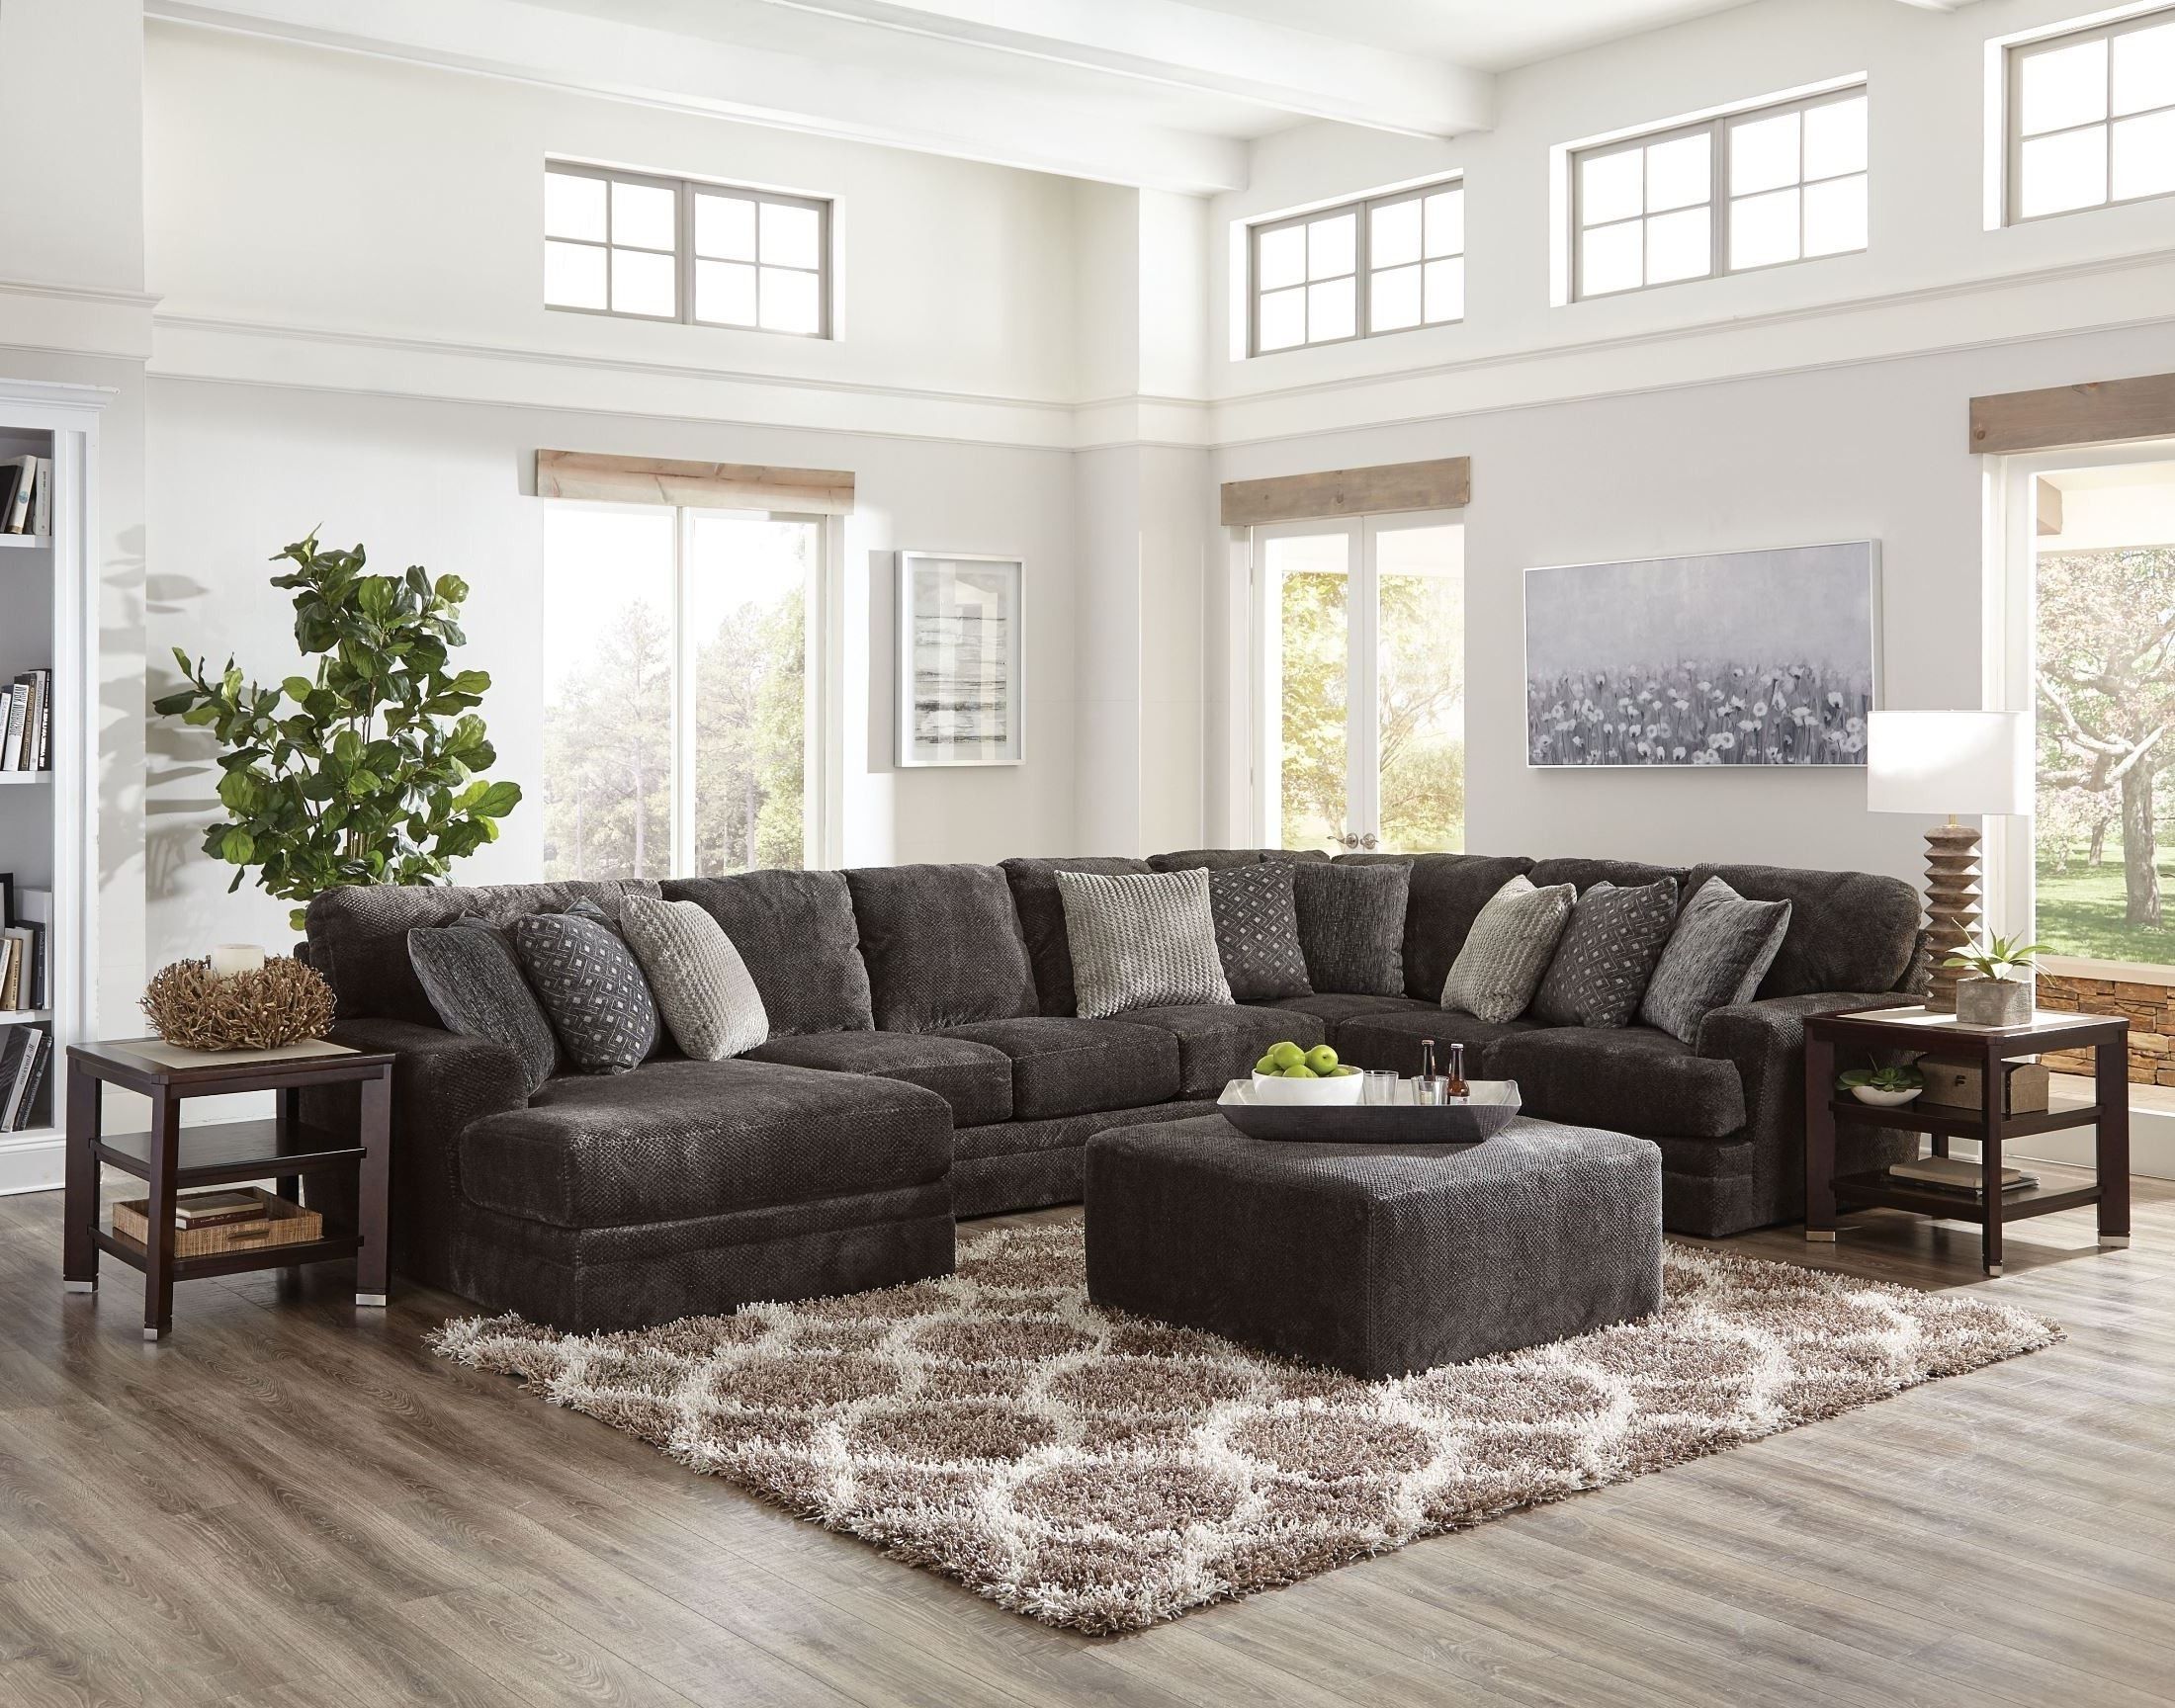 Mammoth Smoke Laf Chaise Sectional From Jackson | Coleman Furniture With Avery 2 Piece Sectionals With Raf Armless Chaise (Photo 6374 of 7825)